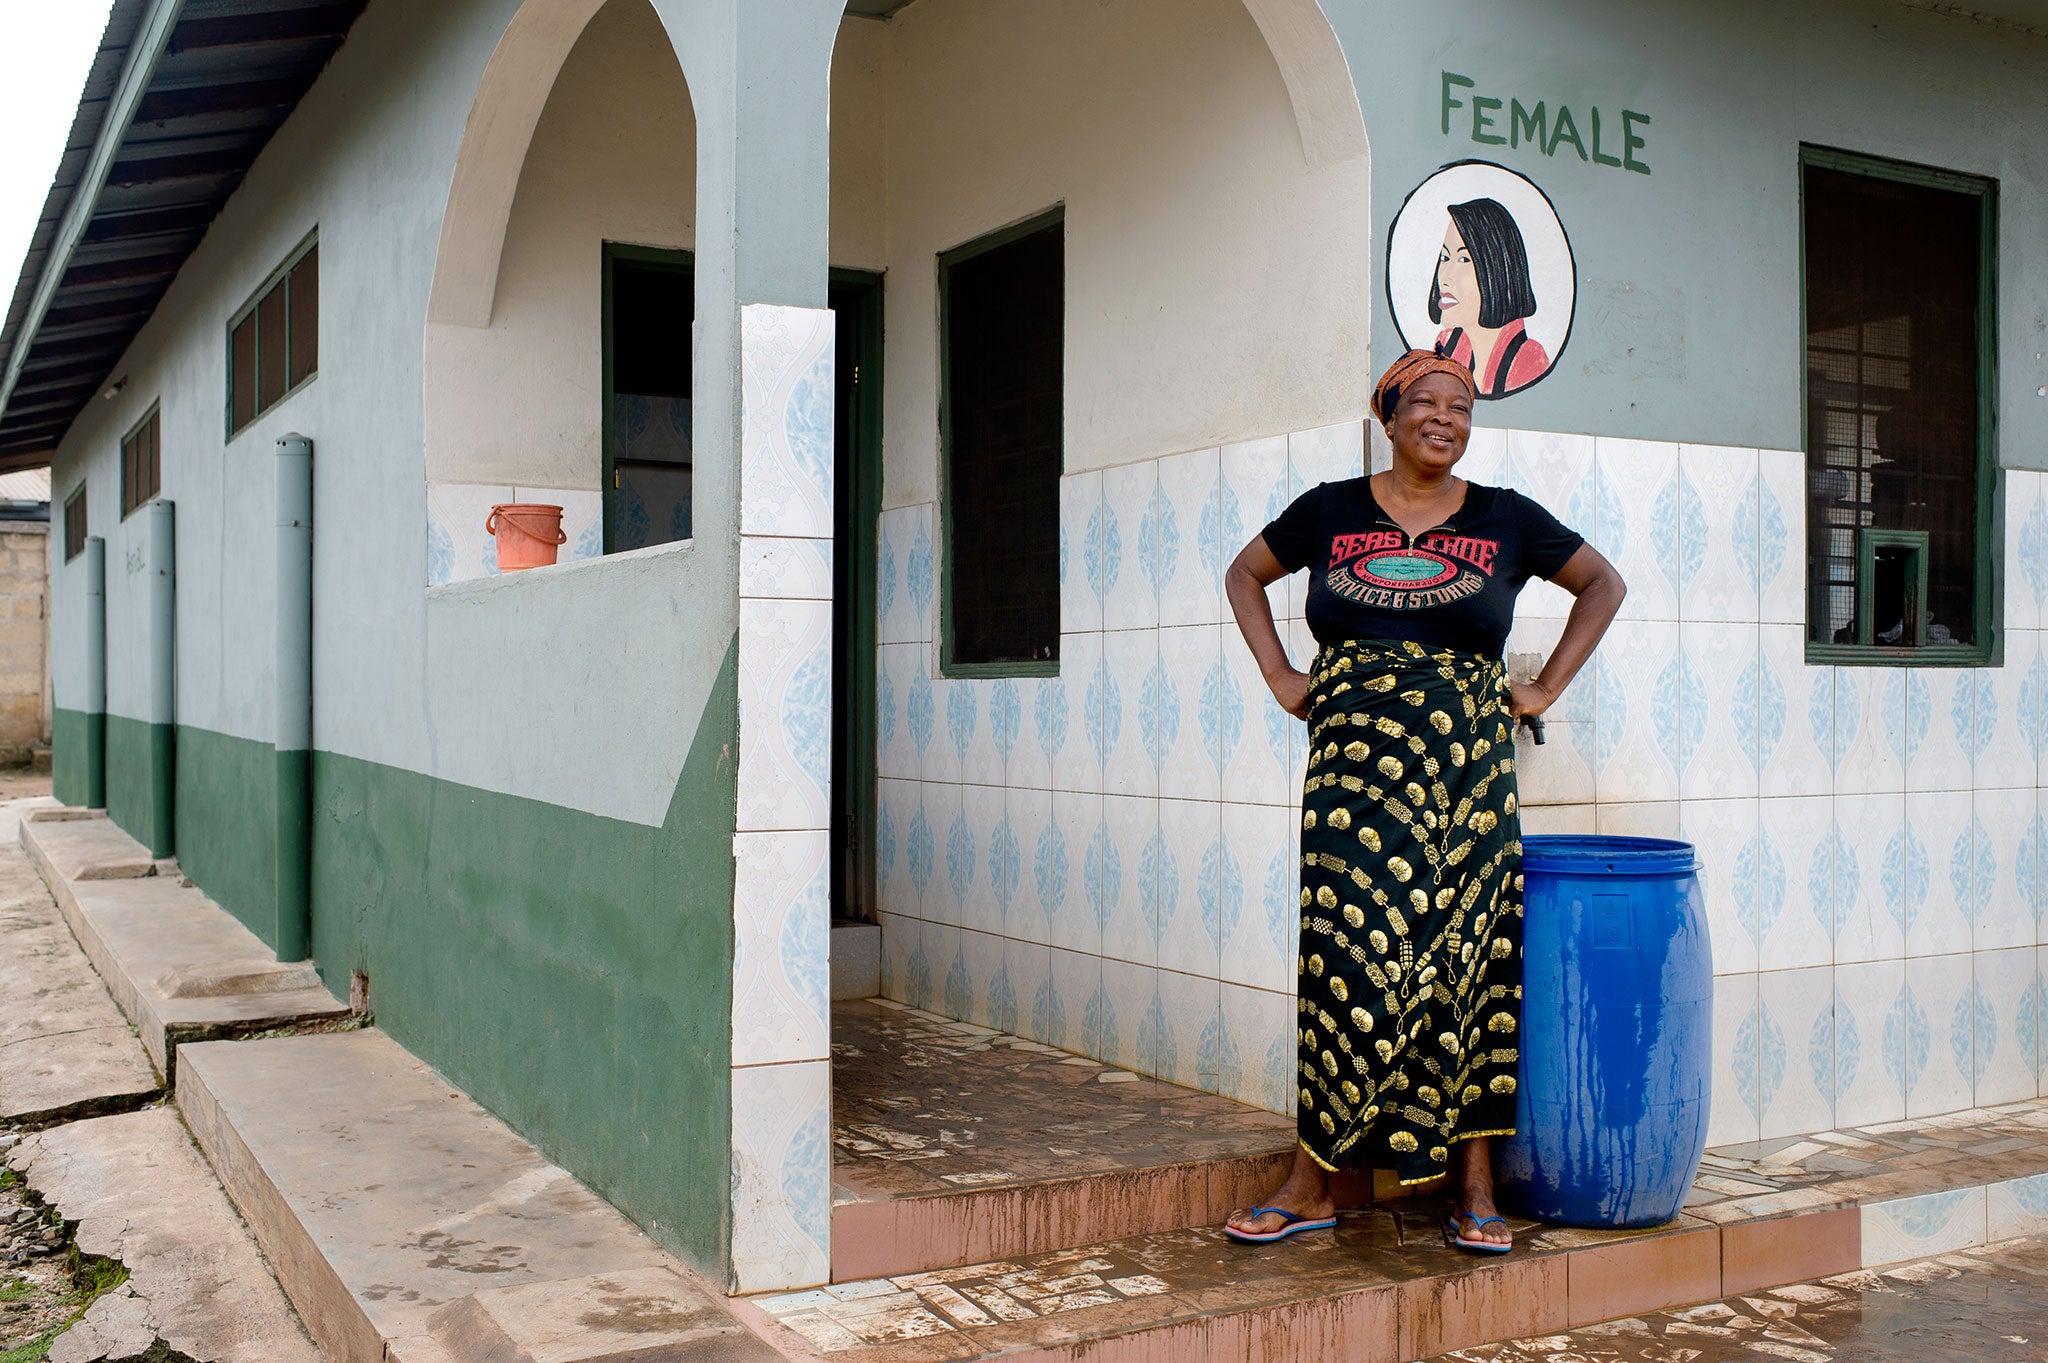 Ima, 47, is a public toilet attendant in Kumasi, Ghana’s second largest city. She lives in a rented room with her husband and four children aged 14-22. She is a very dedicated worker and relies on the income from her job to fund her children's education.